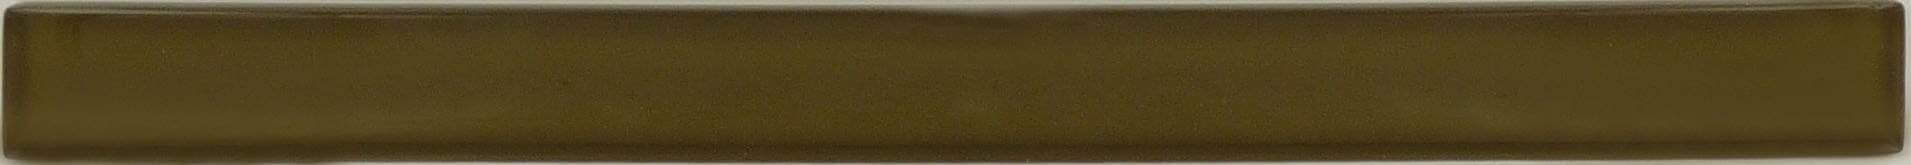 Cocoa Brown 1" x 12" Glossy Glass Liner Millenium Products